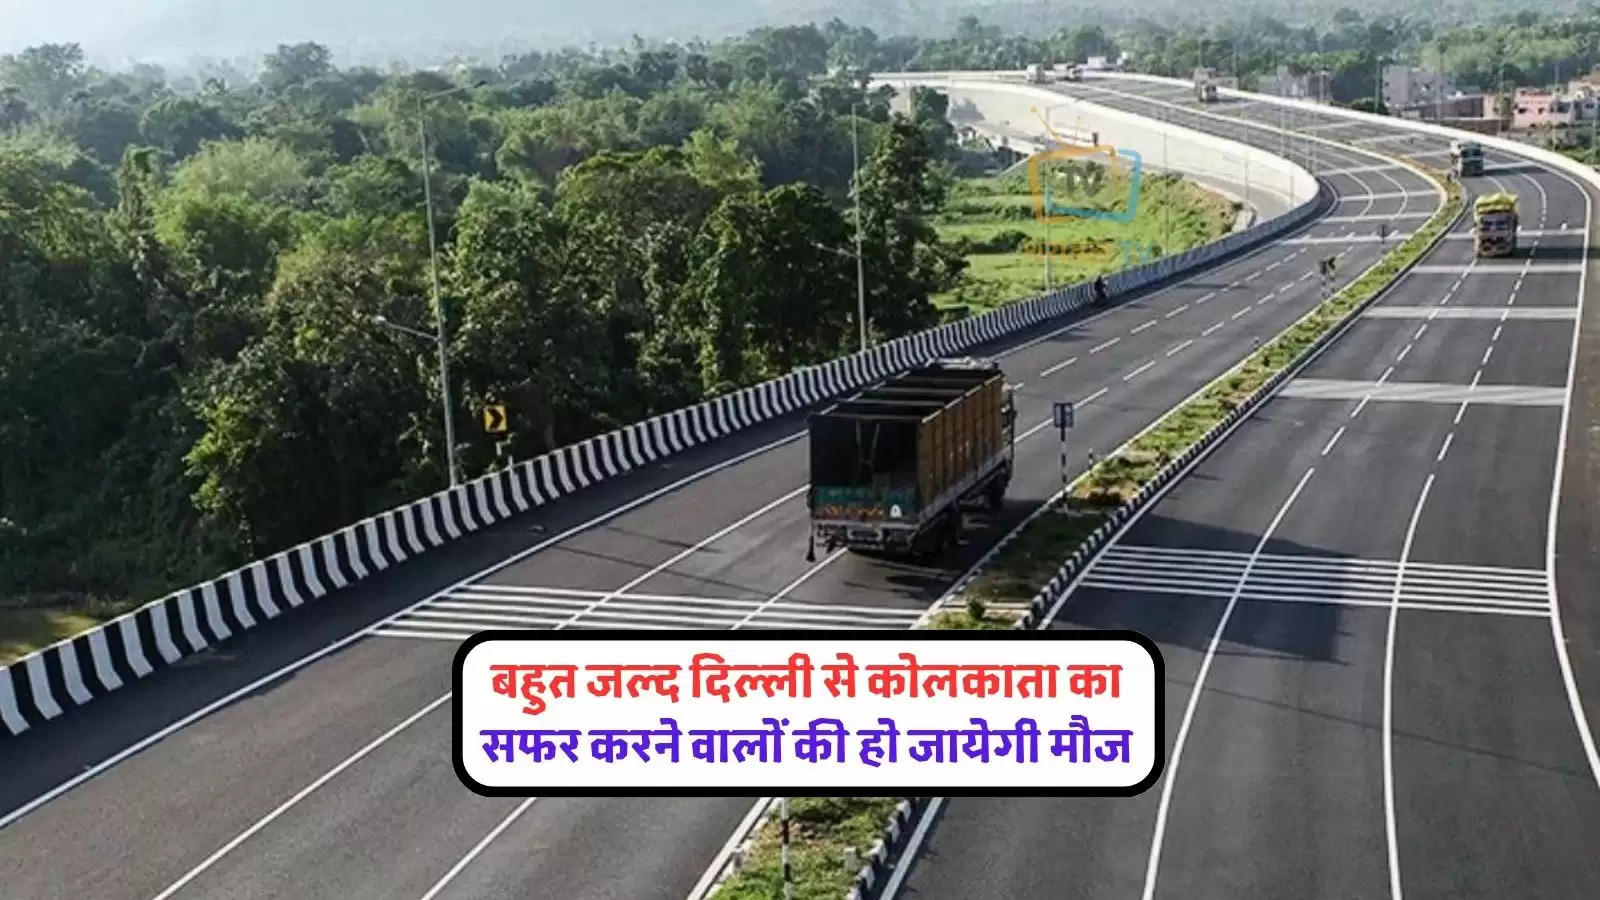 latest-news-another-expressway-is-coming-soon-in-india-the-journey-from-delhi-to-kolkata-will-be-covered-in-just-17-hours